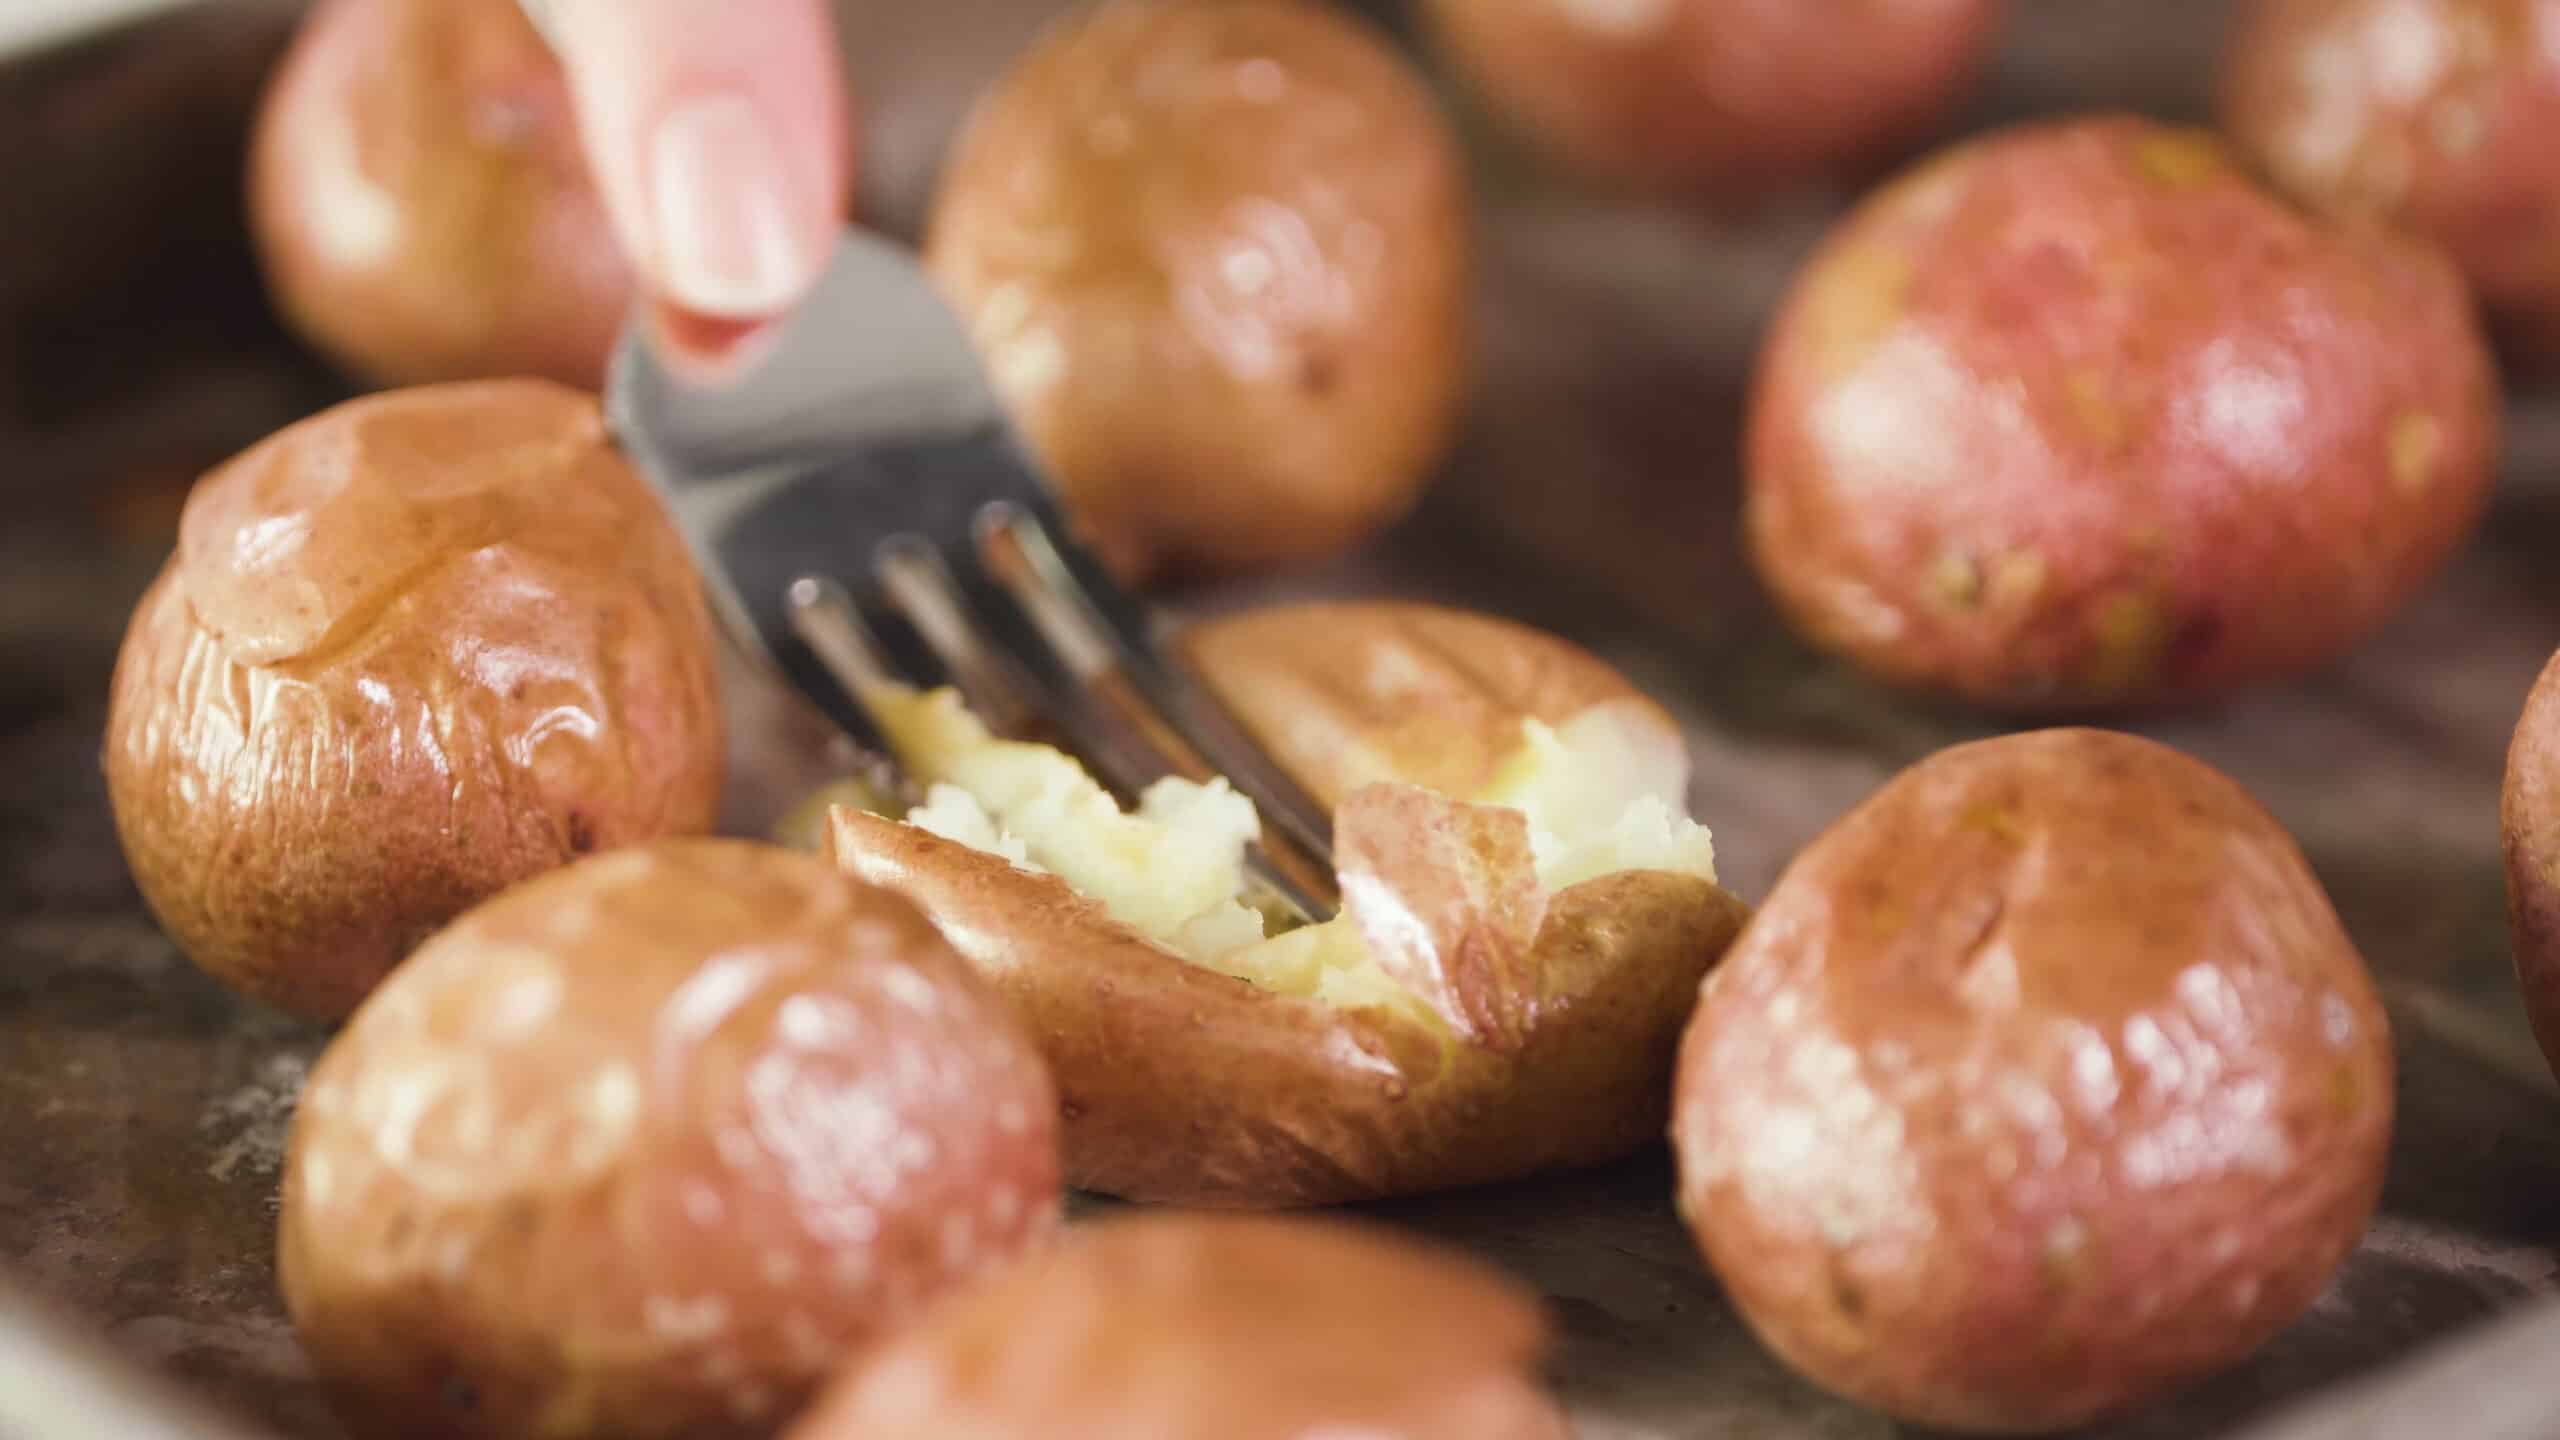 Close-up view of a metal fork smashing a single red potato amongst the remains red potatoes on a metal baking sheet.